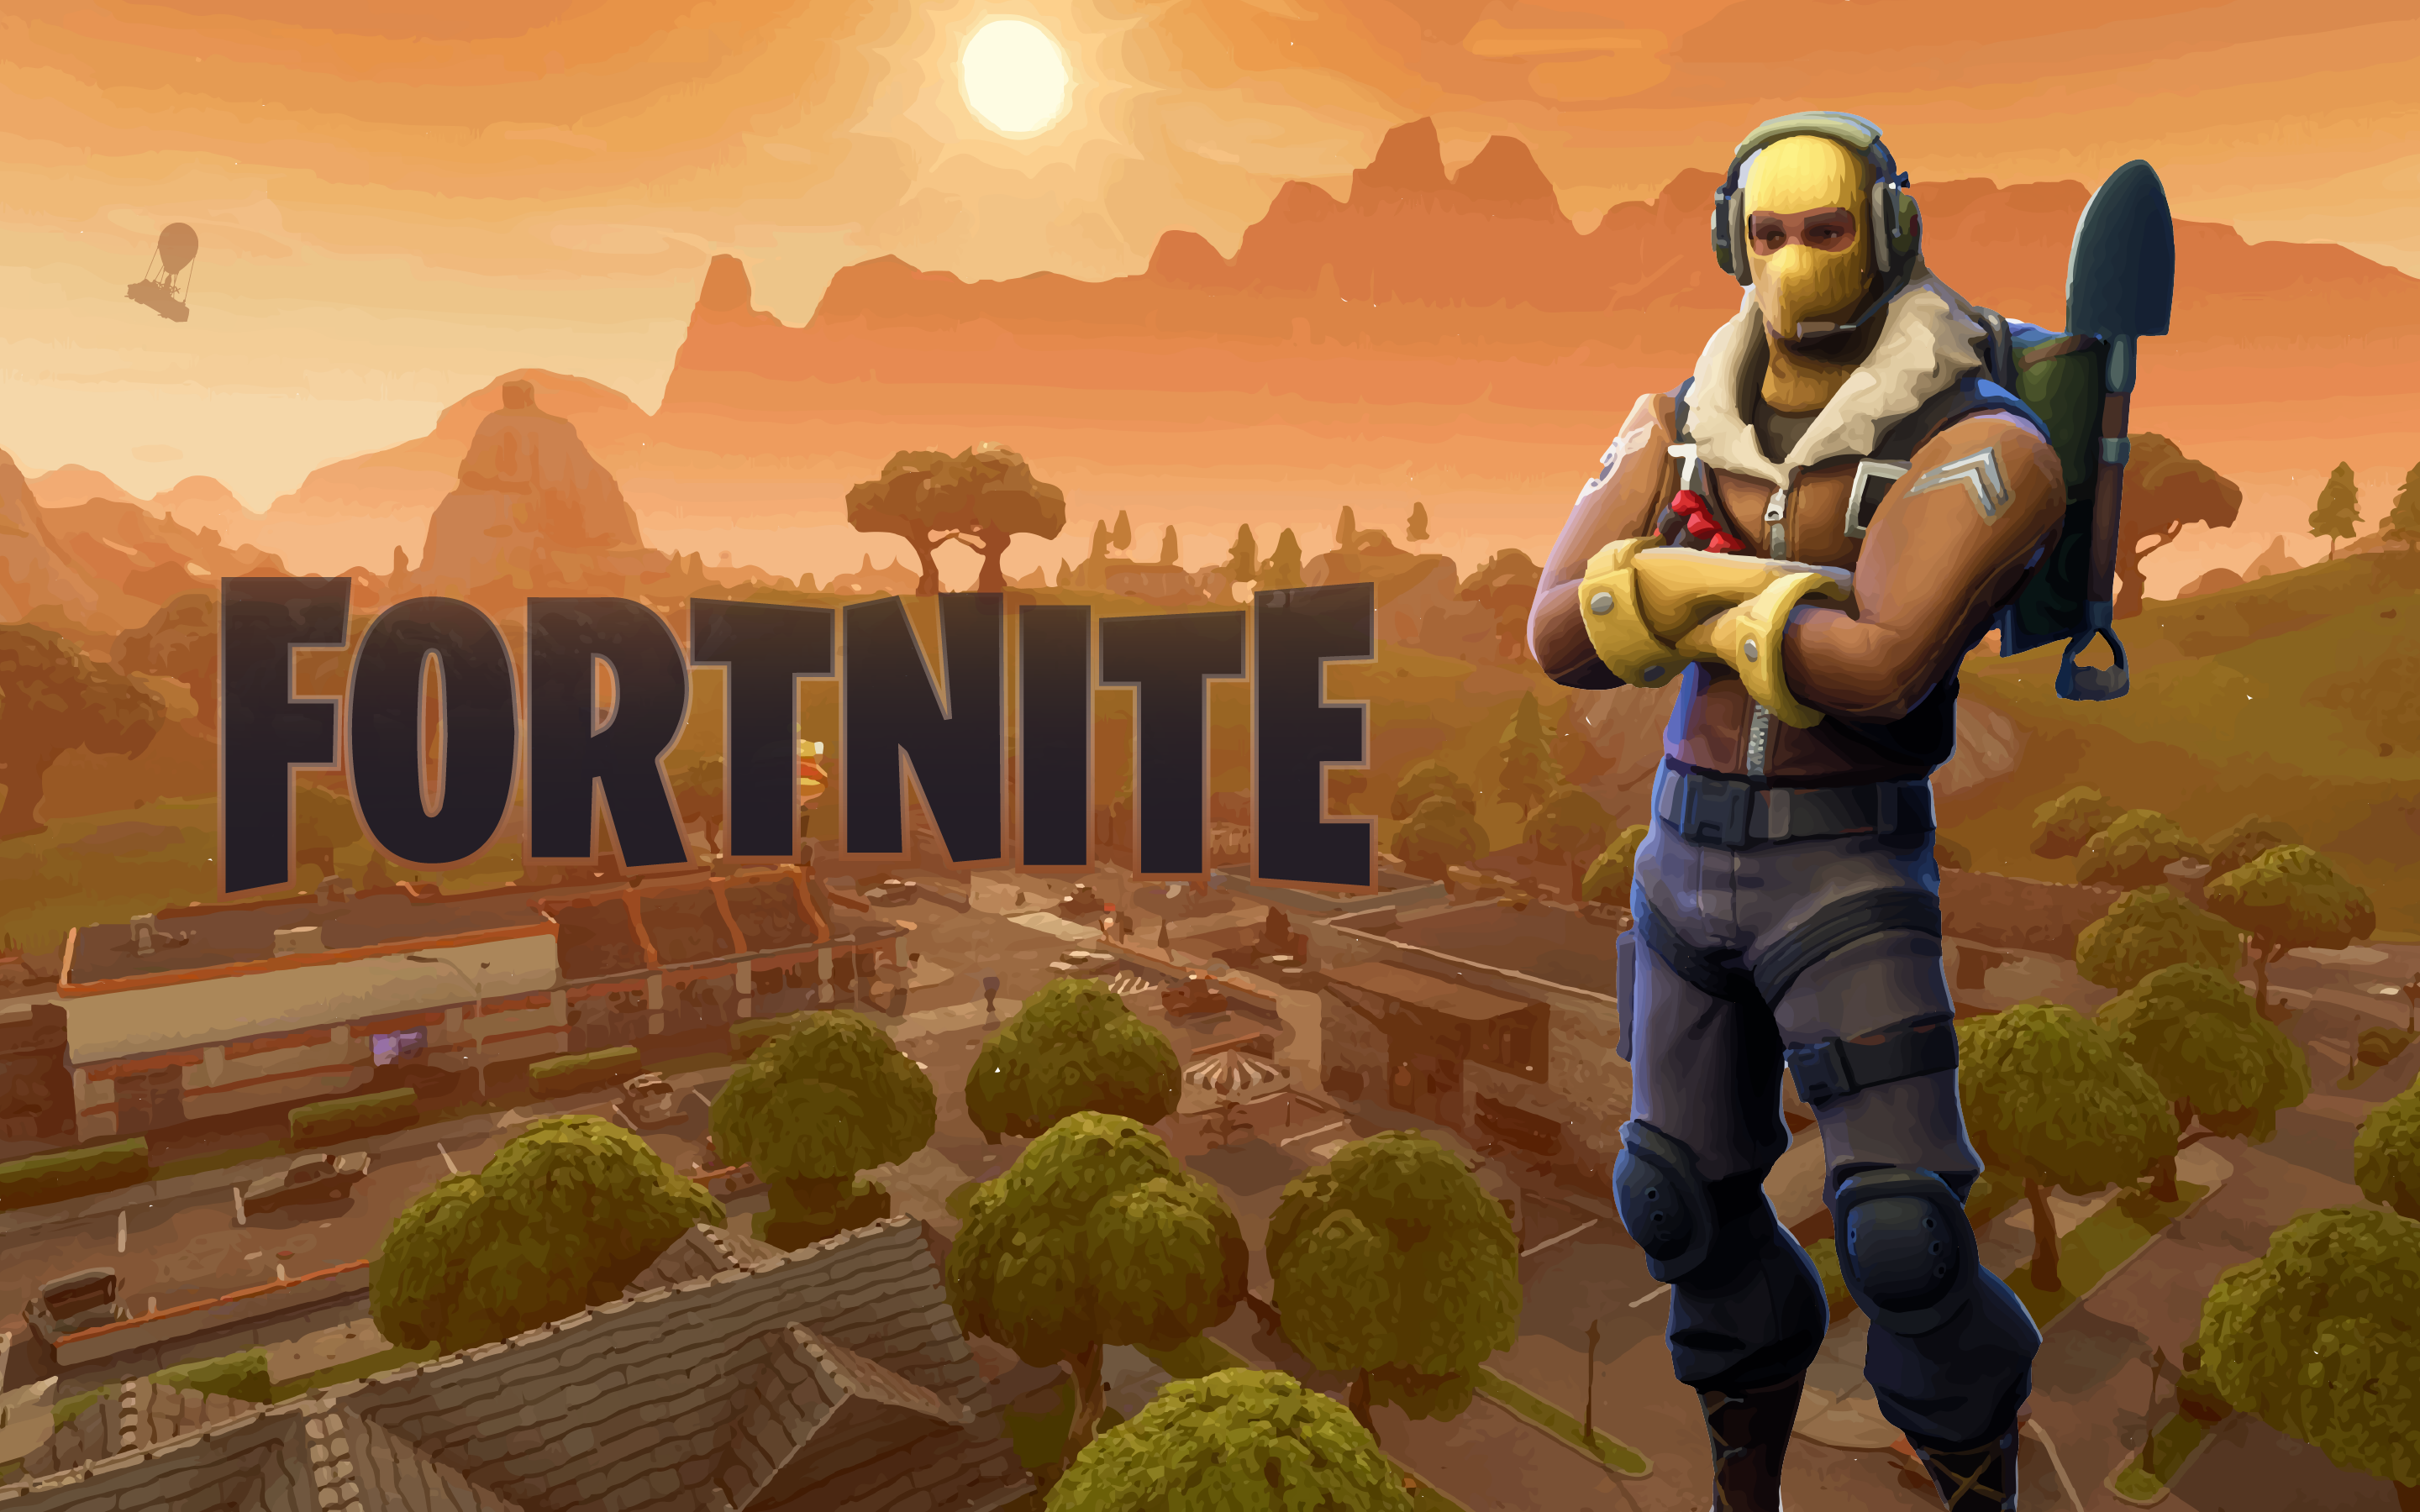 Fortnite Players Propose Ceasefire, Stirs Internet Buzz